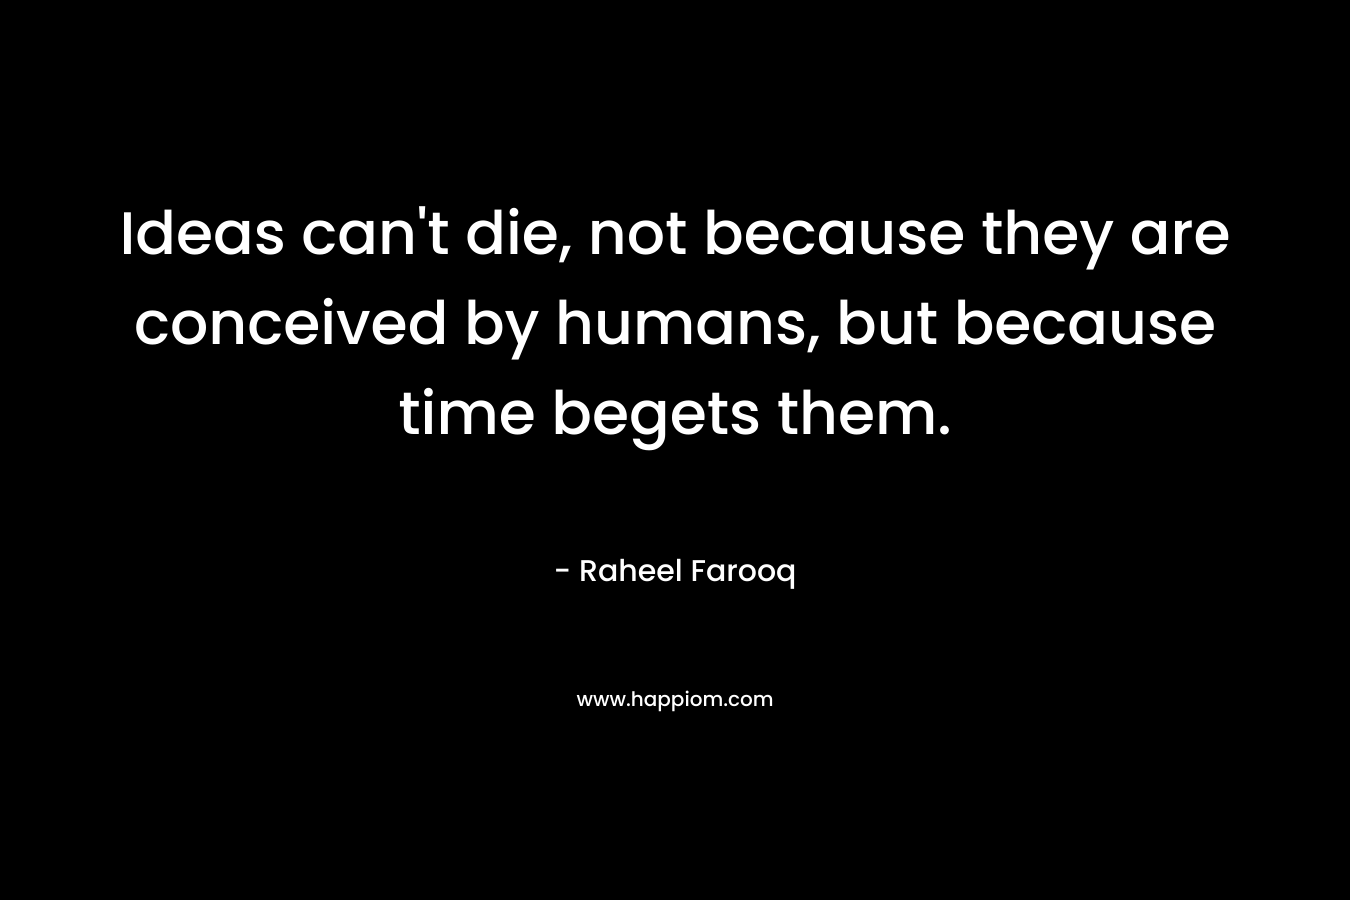 Ideas can’t die, not because they are conceived by humans, but because time begets them. – Raheel Farooq